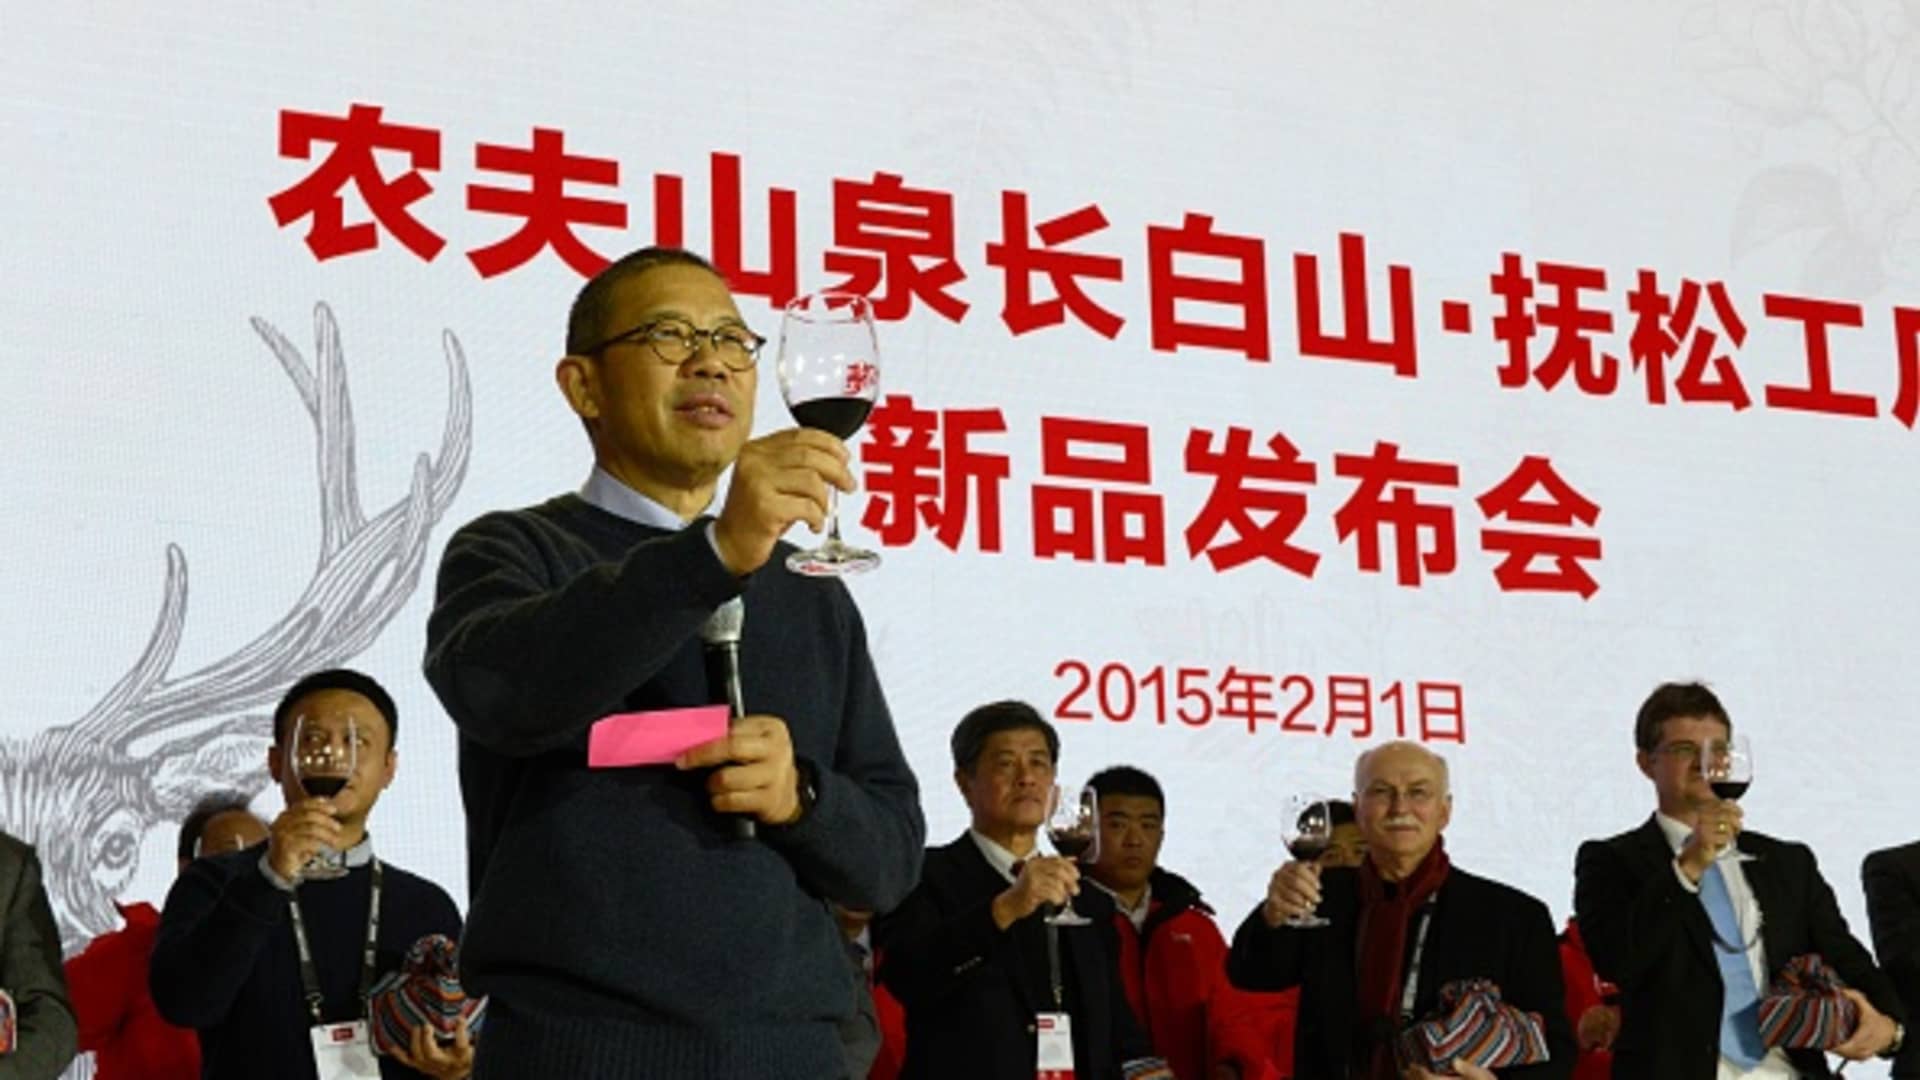 Zhong Shanshan, the chairman of Nongfu Spring Company, attends the Nongfu Spring new product launch conference on February 1, 2015 in Baishan, Jilin Province of China.